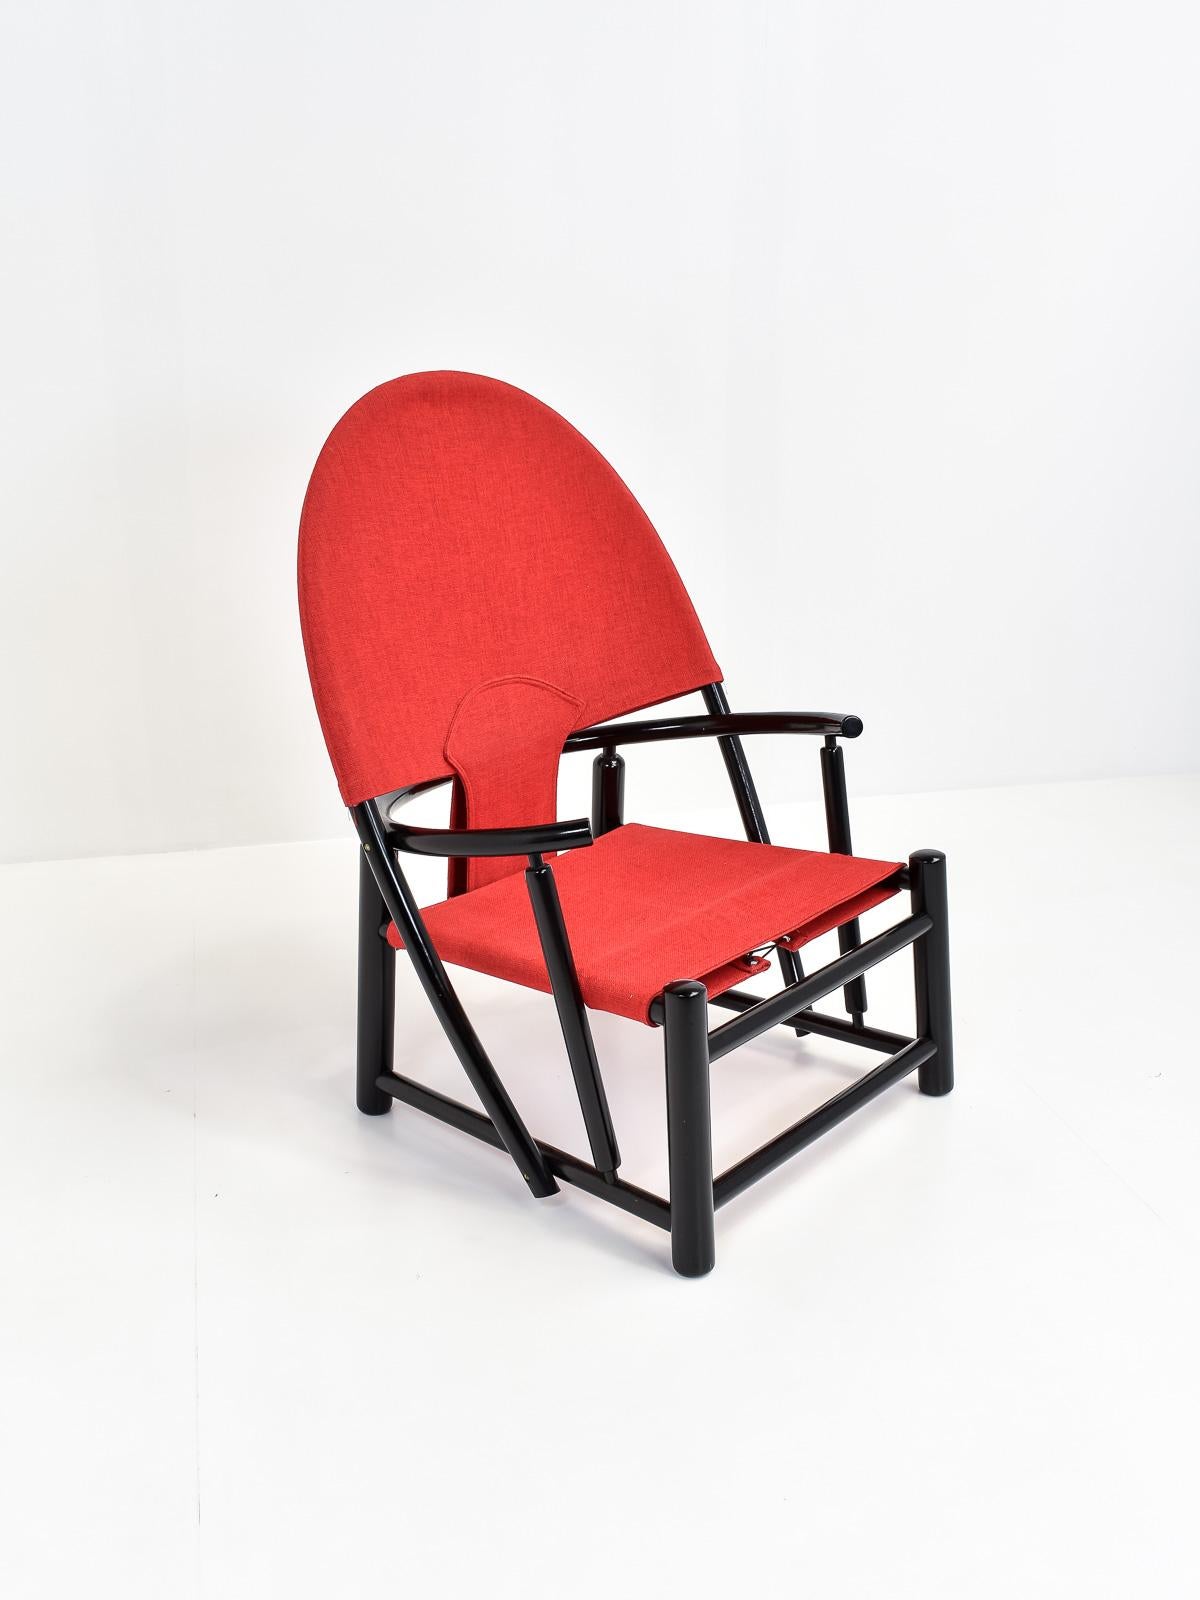 Italian G23 Hoop Chair by Piero Palange & Werther Toffoloni for Germa